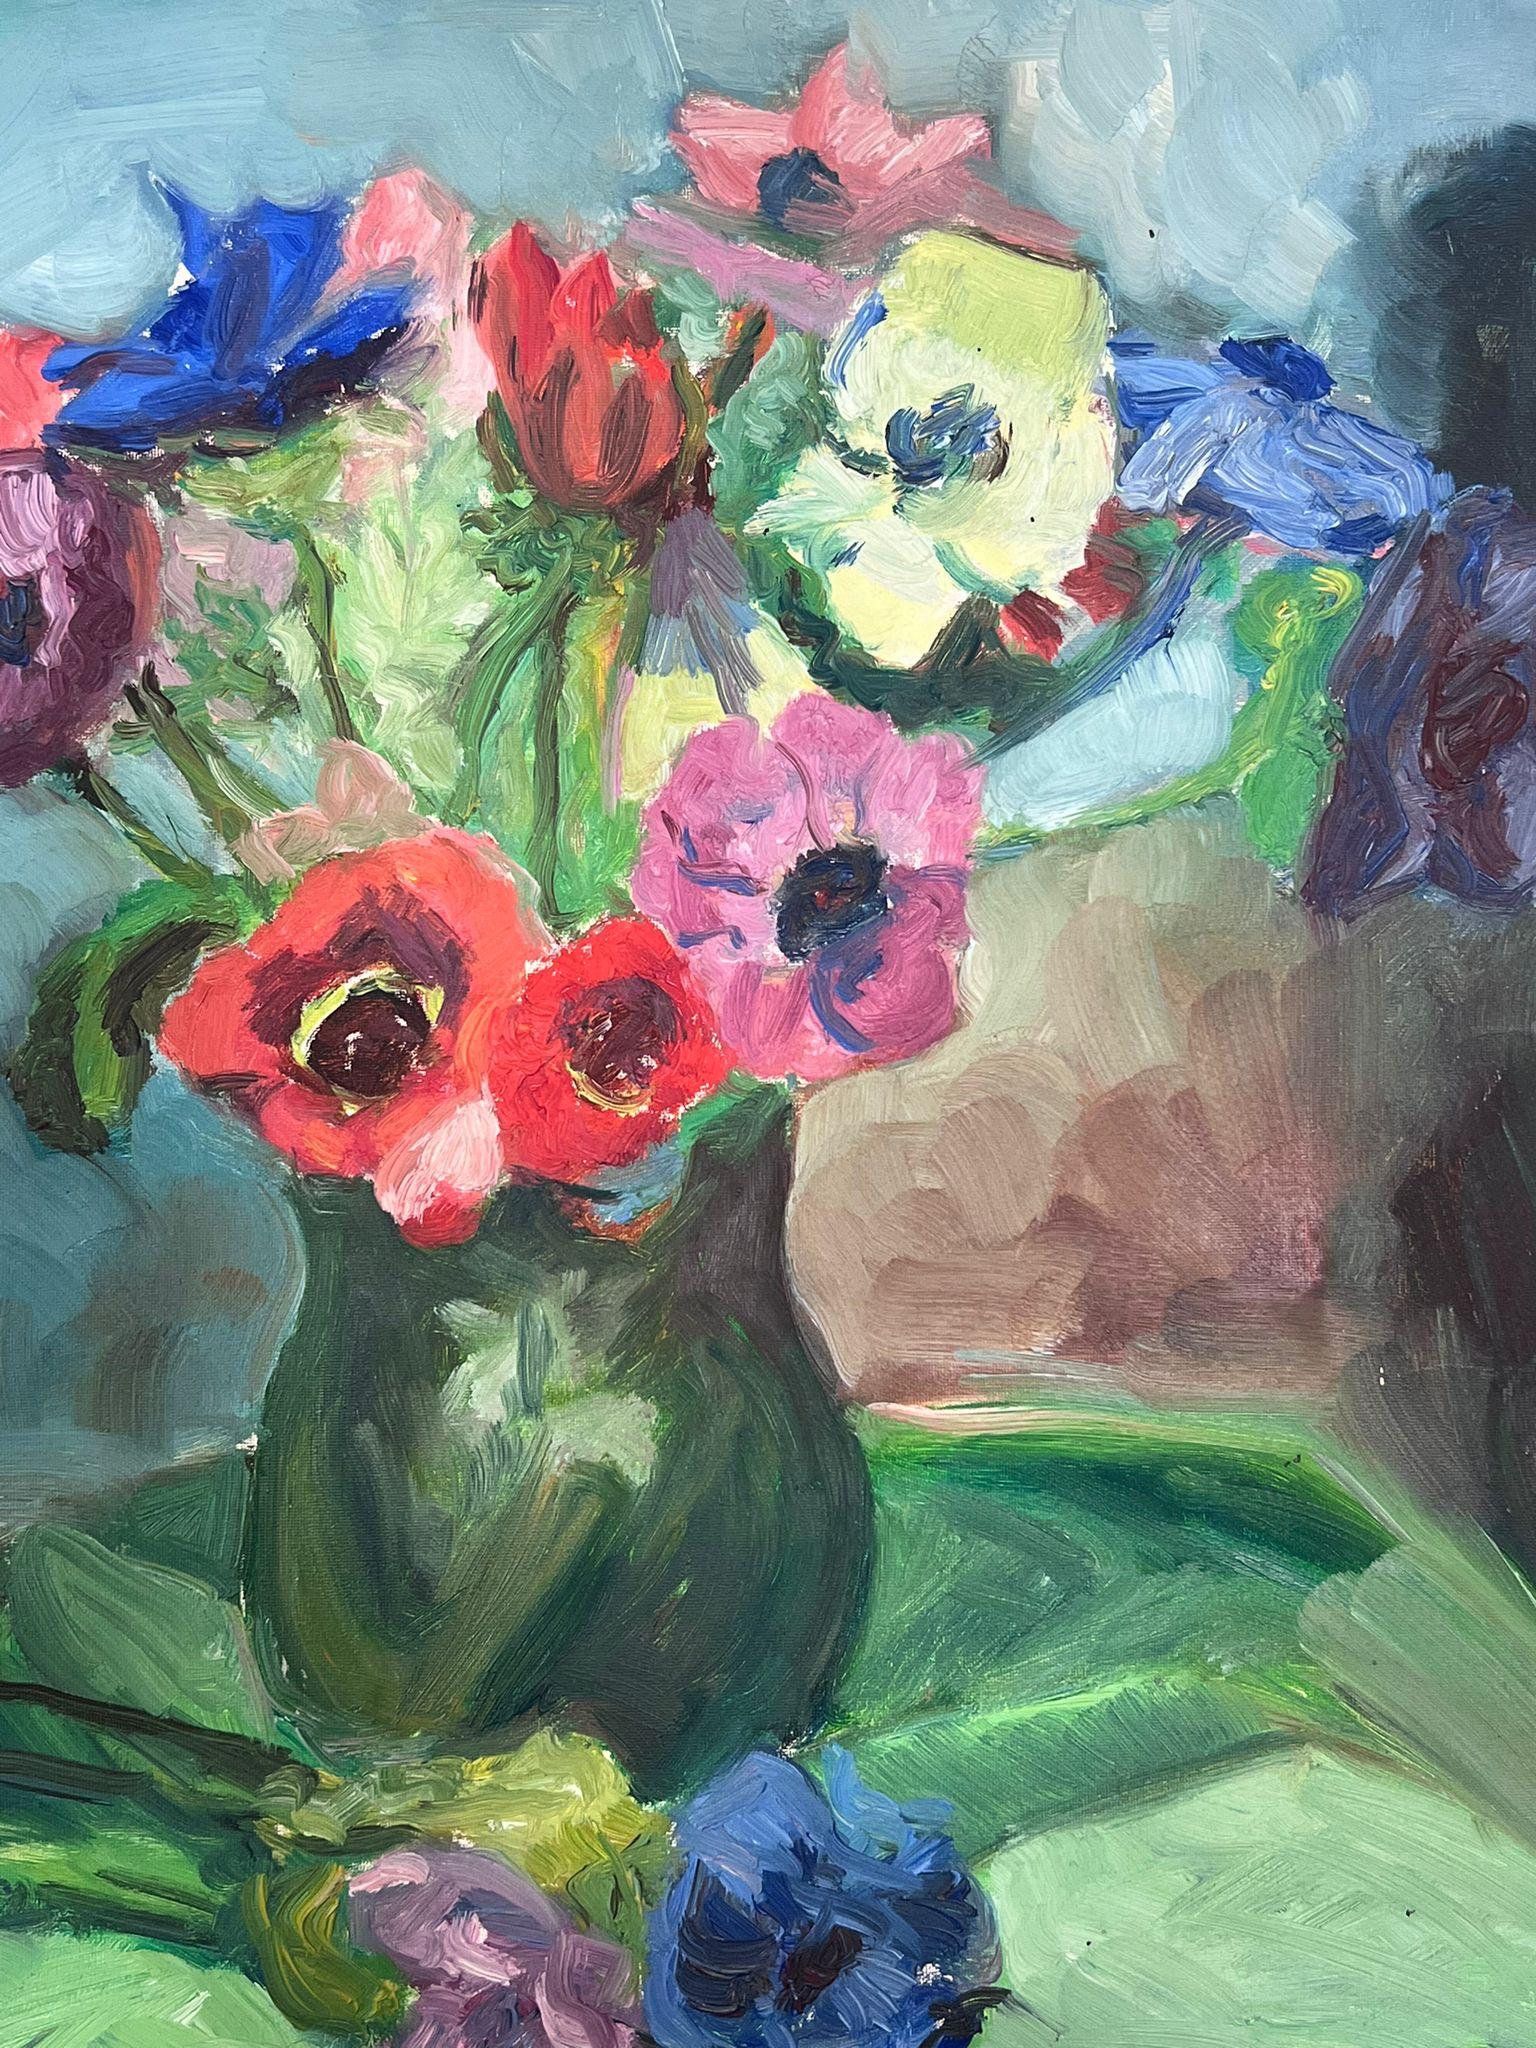 Still Life of Flowers
by Guy Nicod
(French 1923 - 2021)
oil on artist paper, unframed
painting : 13.5 x 10.5 inches
provenance: artists estate, France
condition: very good and sound condition